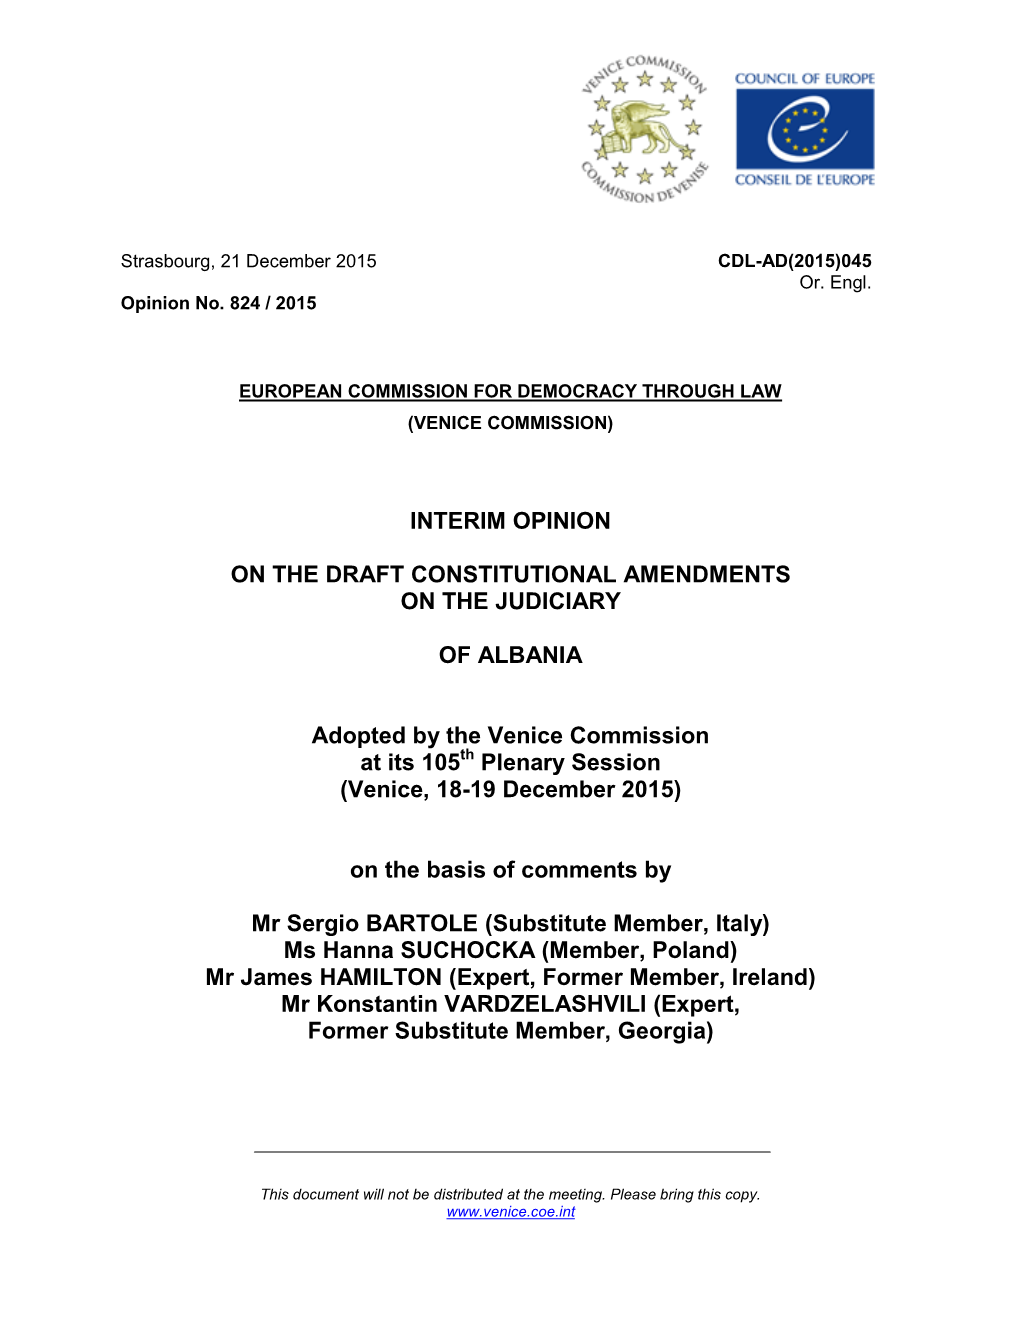 INTERIM OPINION on the DRAFT CONSTITUTIONAL AMENDMENTS on the JUDICIARY of ALBANIA Adopted by the Venice Commission at Its 105 P